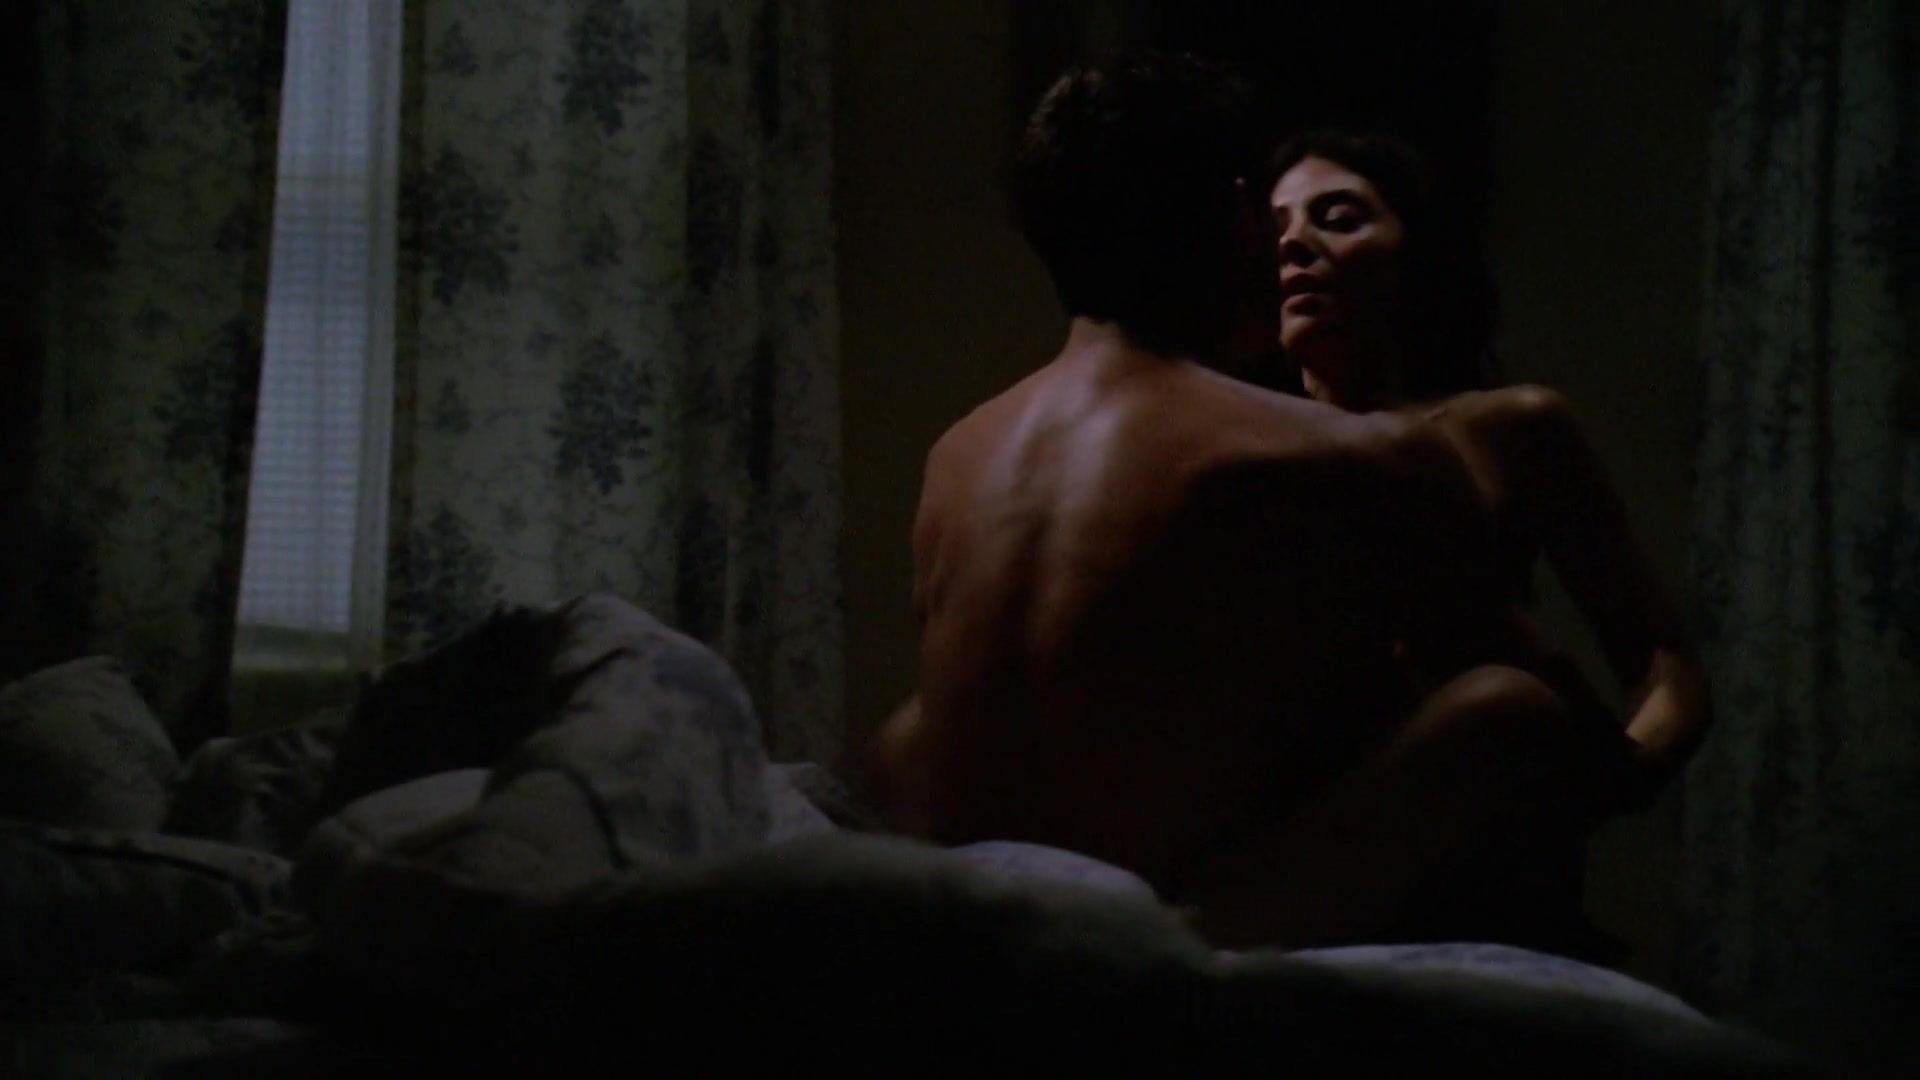 Lily Carter Sexy Callie Thorne naked -The Wire s02e06 (2003) Brunet